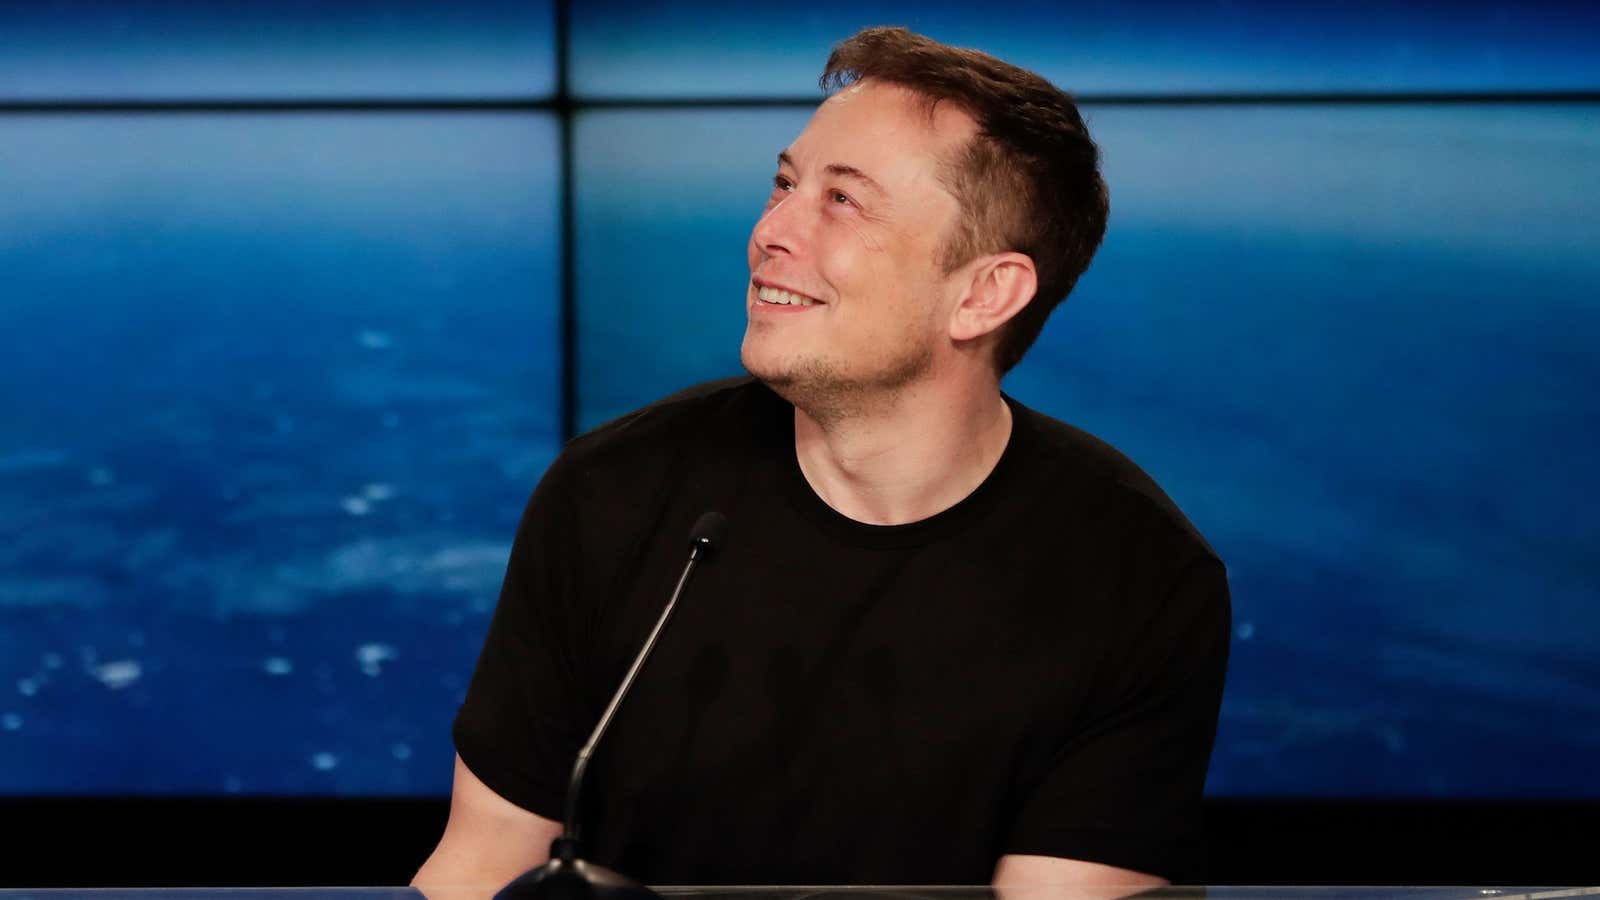 When it comes to quarterly conference calls, Elon Musk might be on to something.